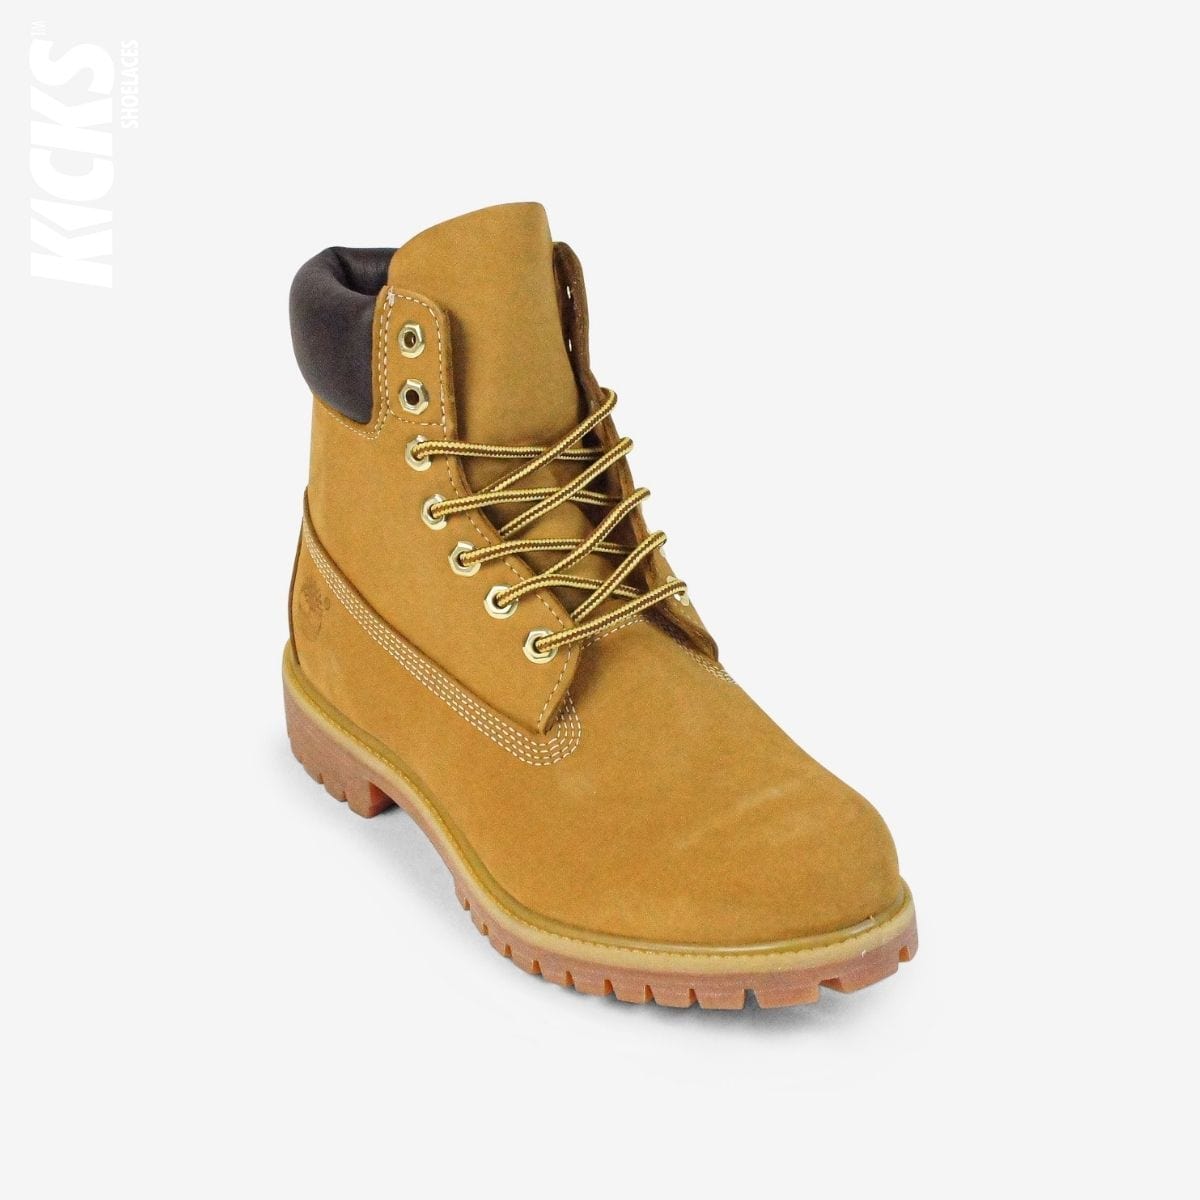 shoelaces-online-deep-brown-and-yellow-boot-laces-on-timberland-boots